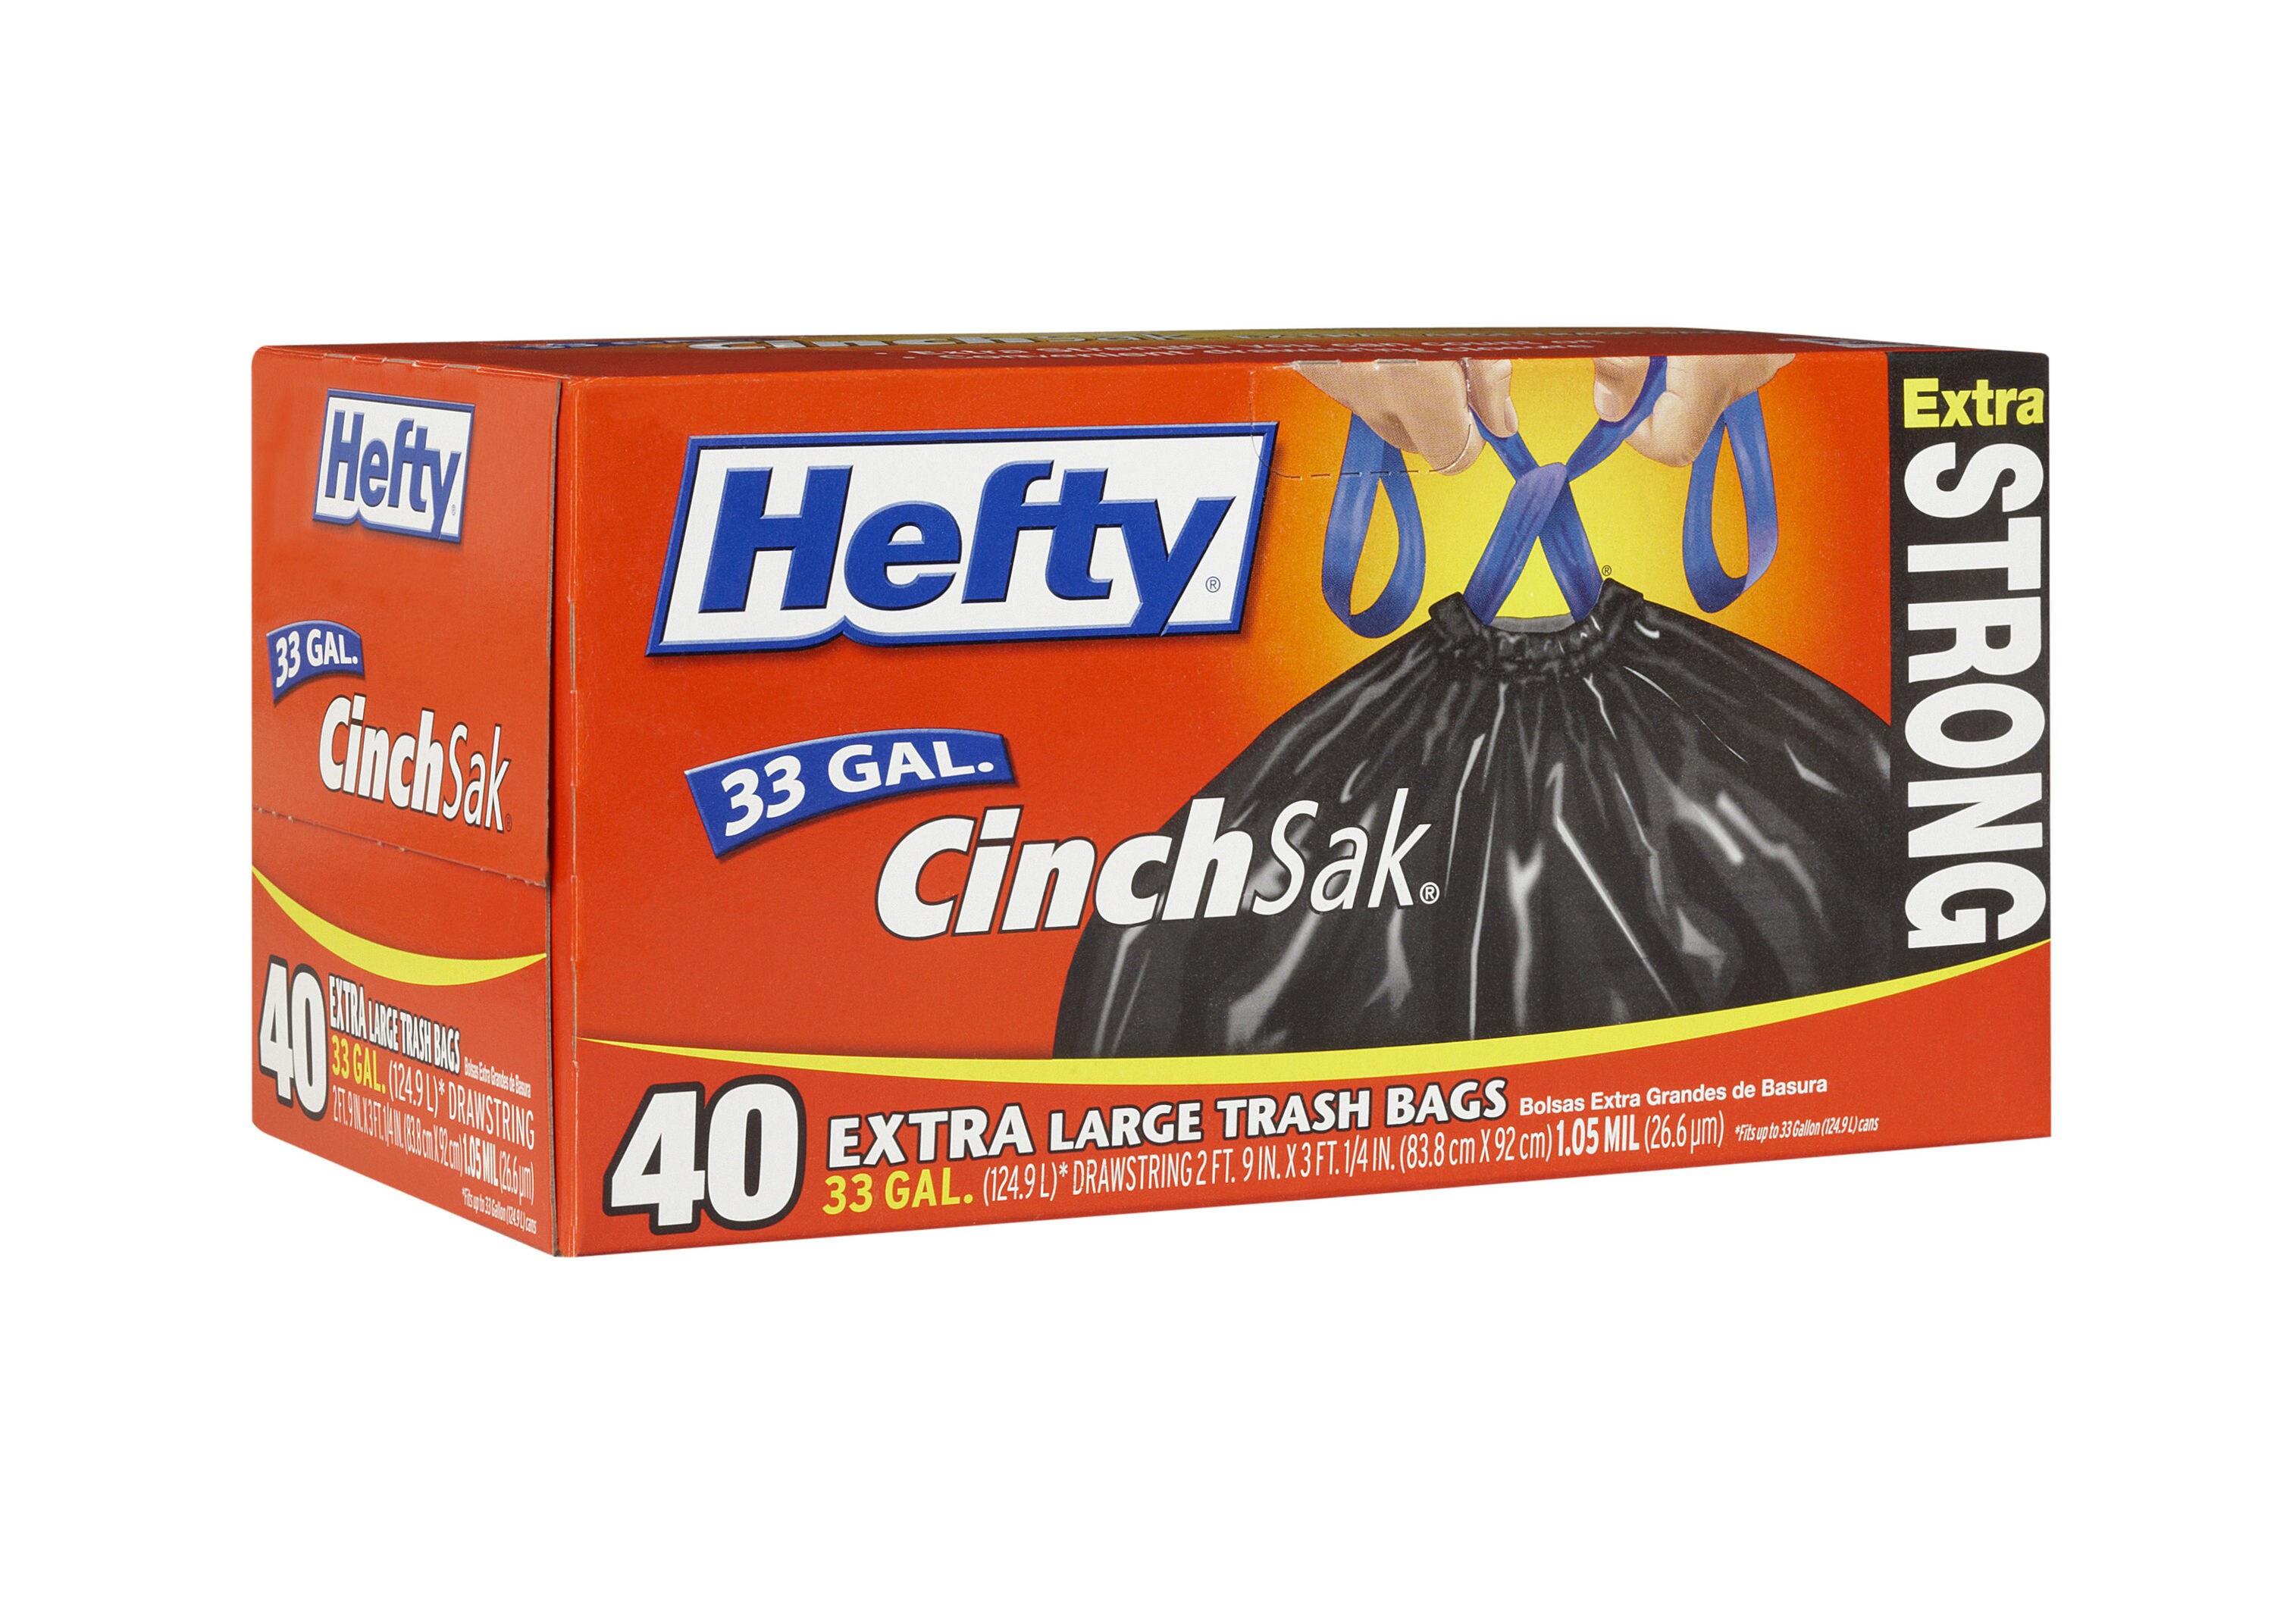 Hefty Strong Trash Can Liner 33 Gallon Extra Large Drawstring Bags 26 ct Box New